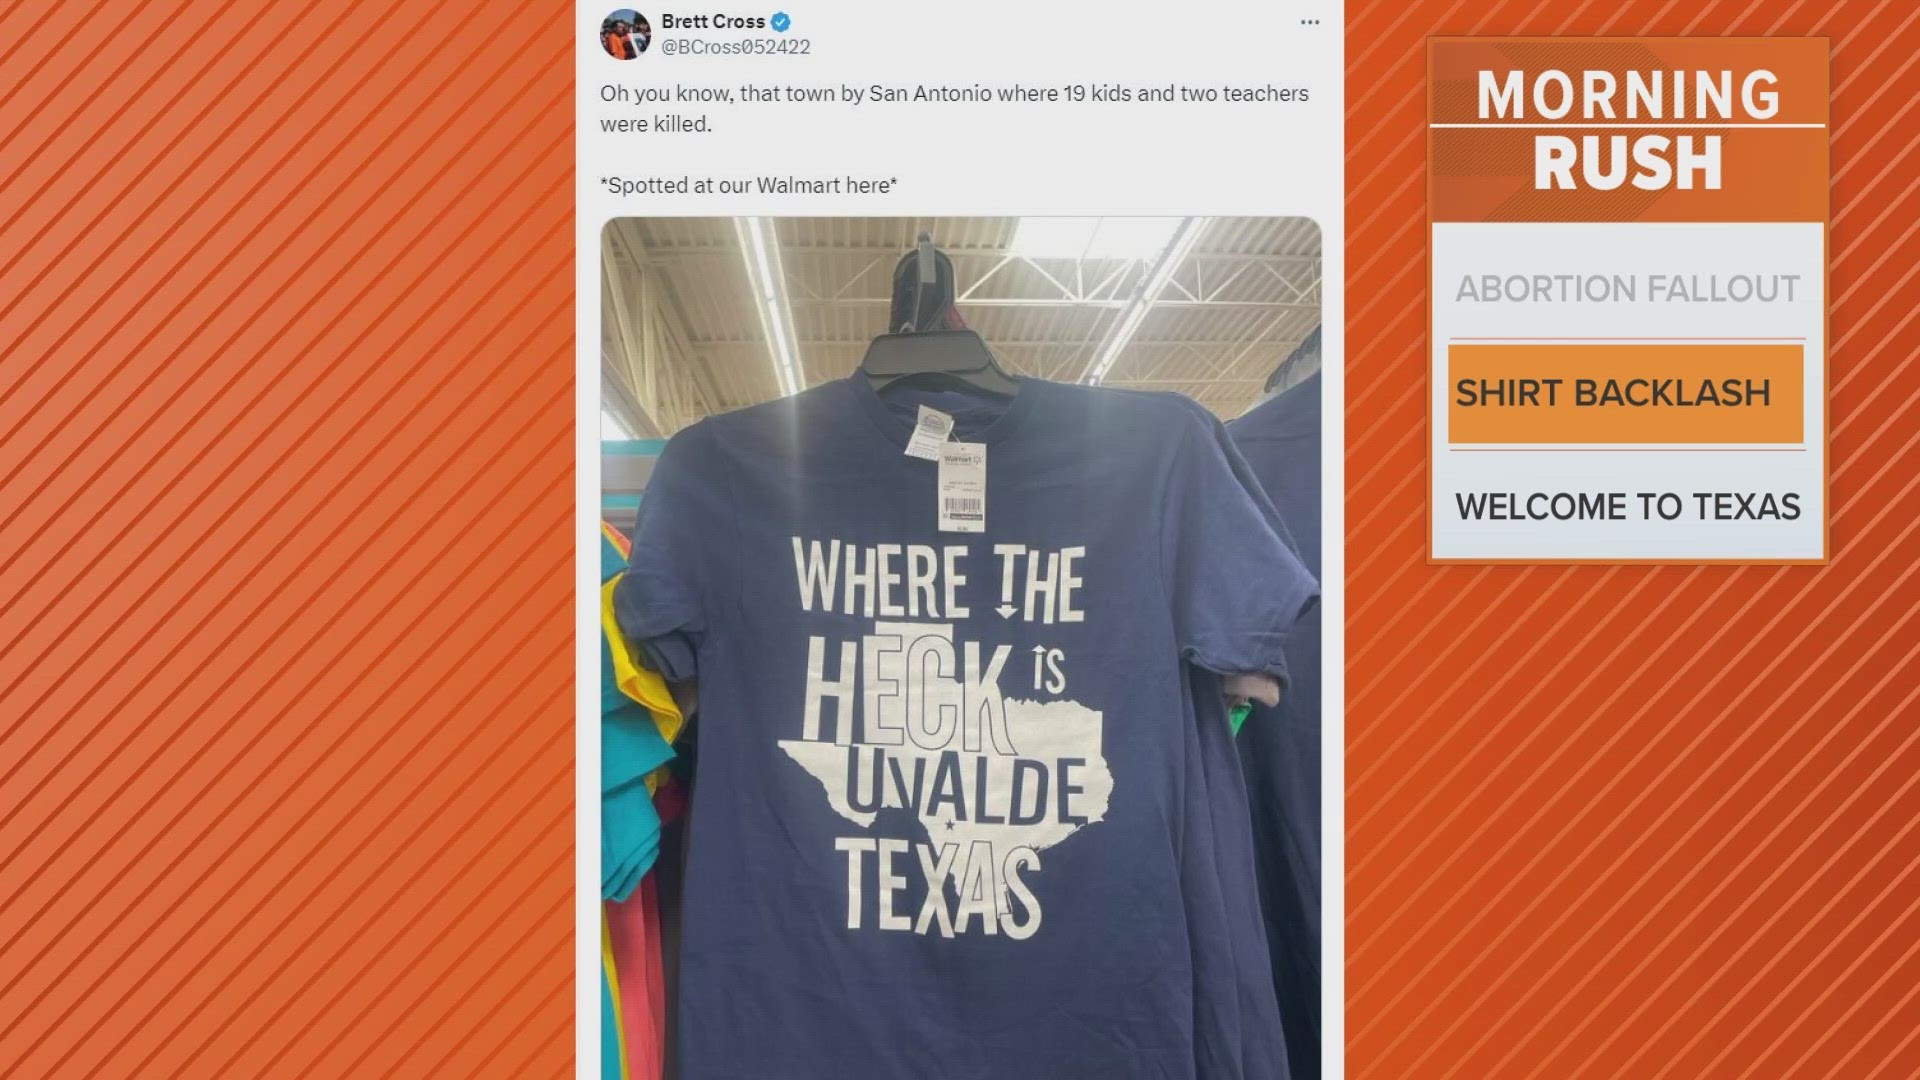 The father of one of the victims in the deadly 2022 mass shooting posted the shirt on social media.